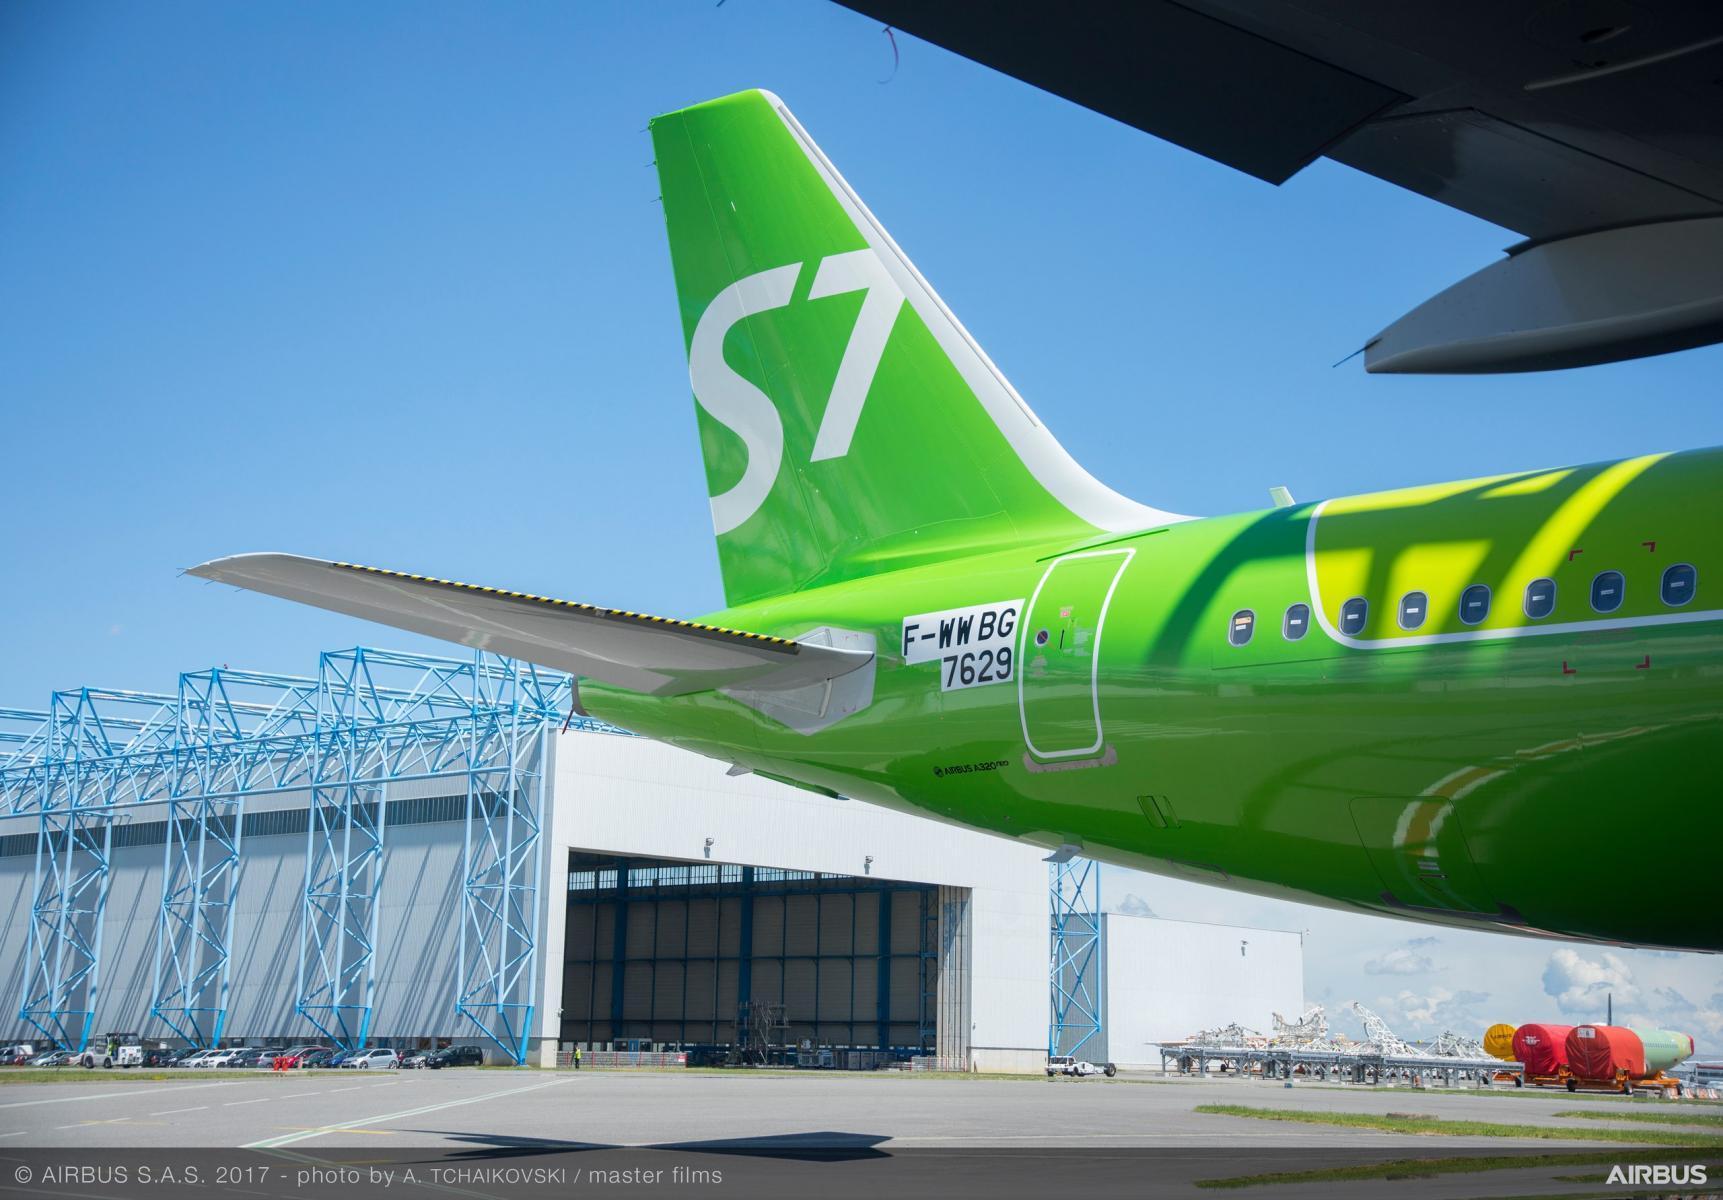 S7 airlines телефон. S7 Airlines авиакомпания. Авиакомпания Сибирь s7 Airlines. Самолёты авиакомпании s7 Airlines. Самолет Джей Севен.